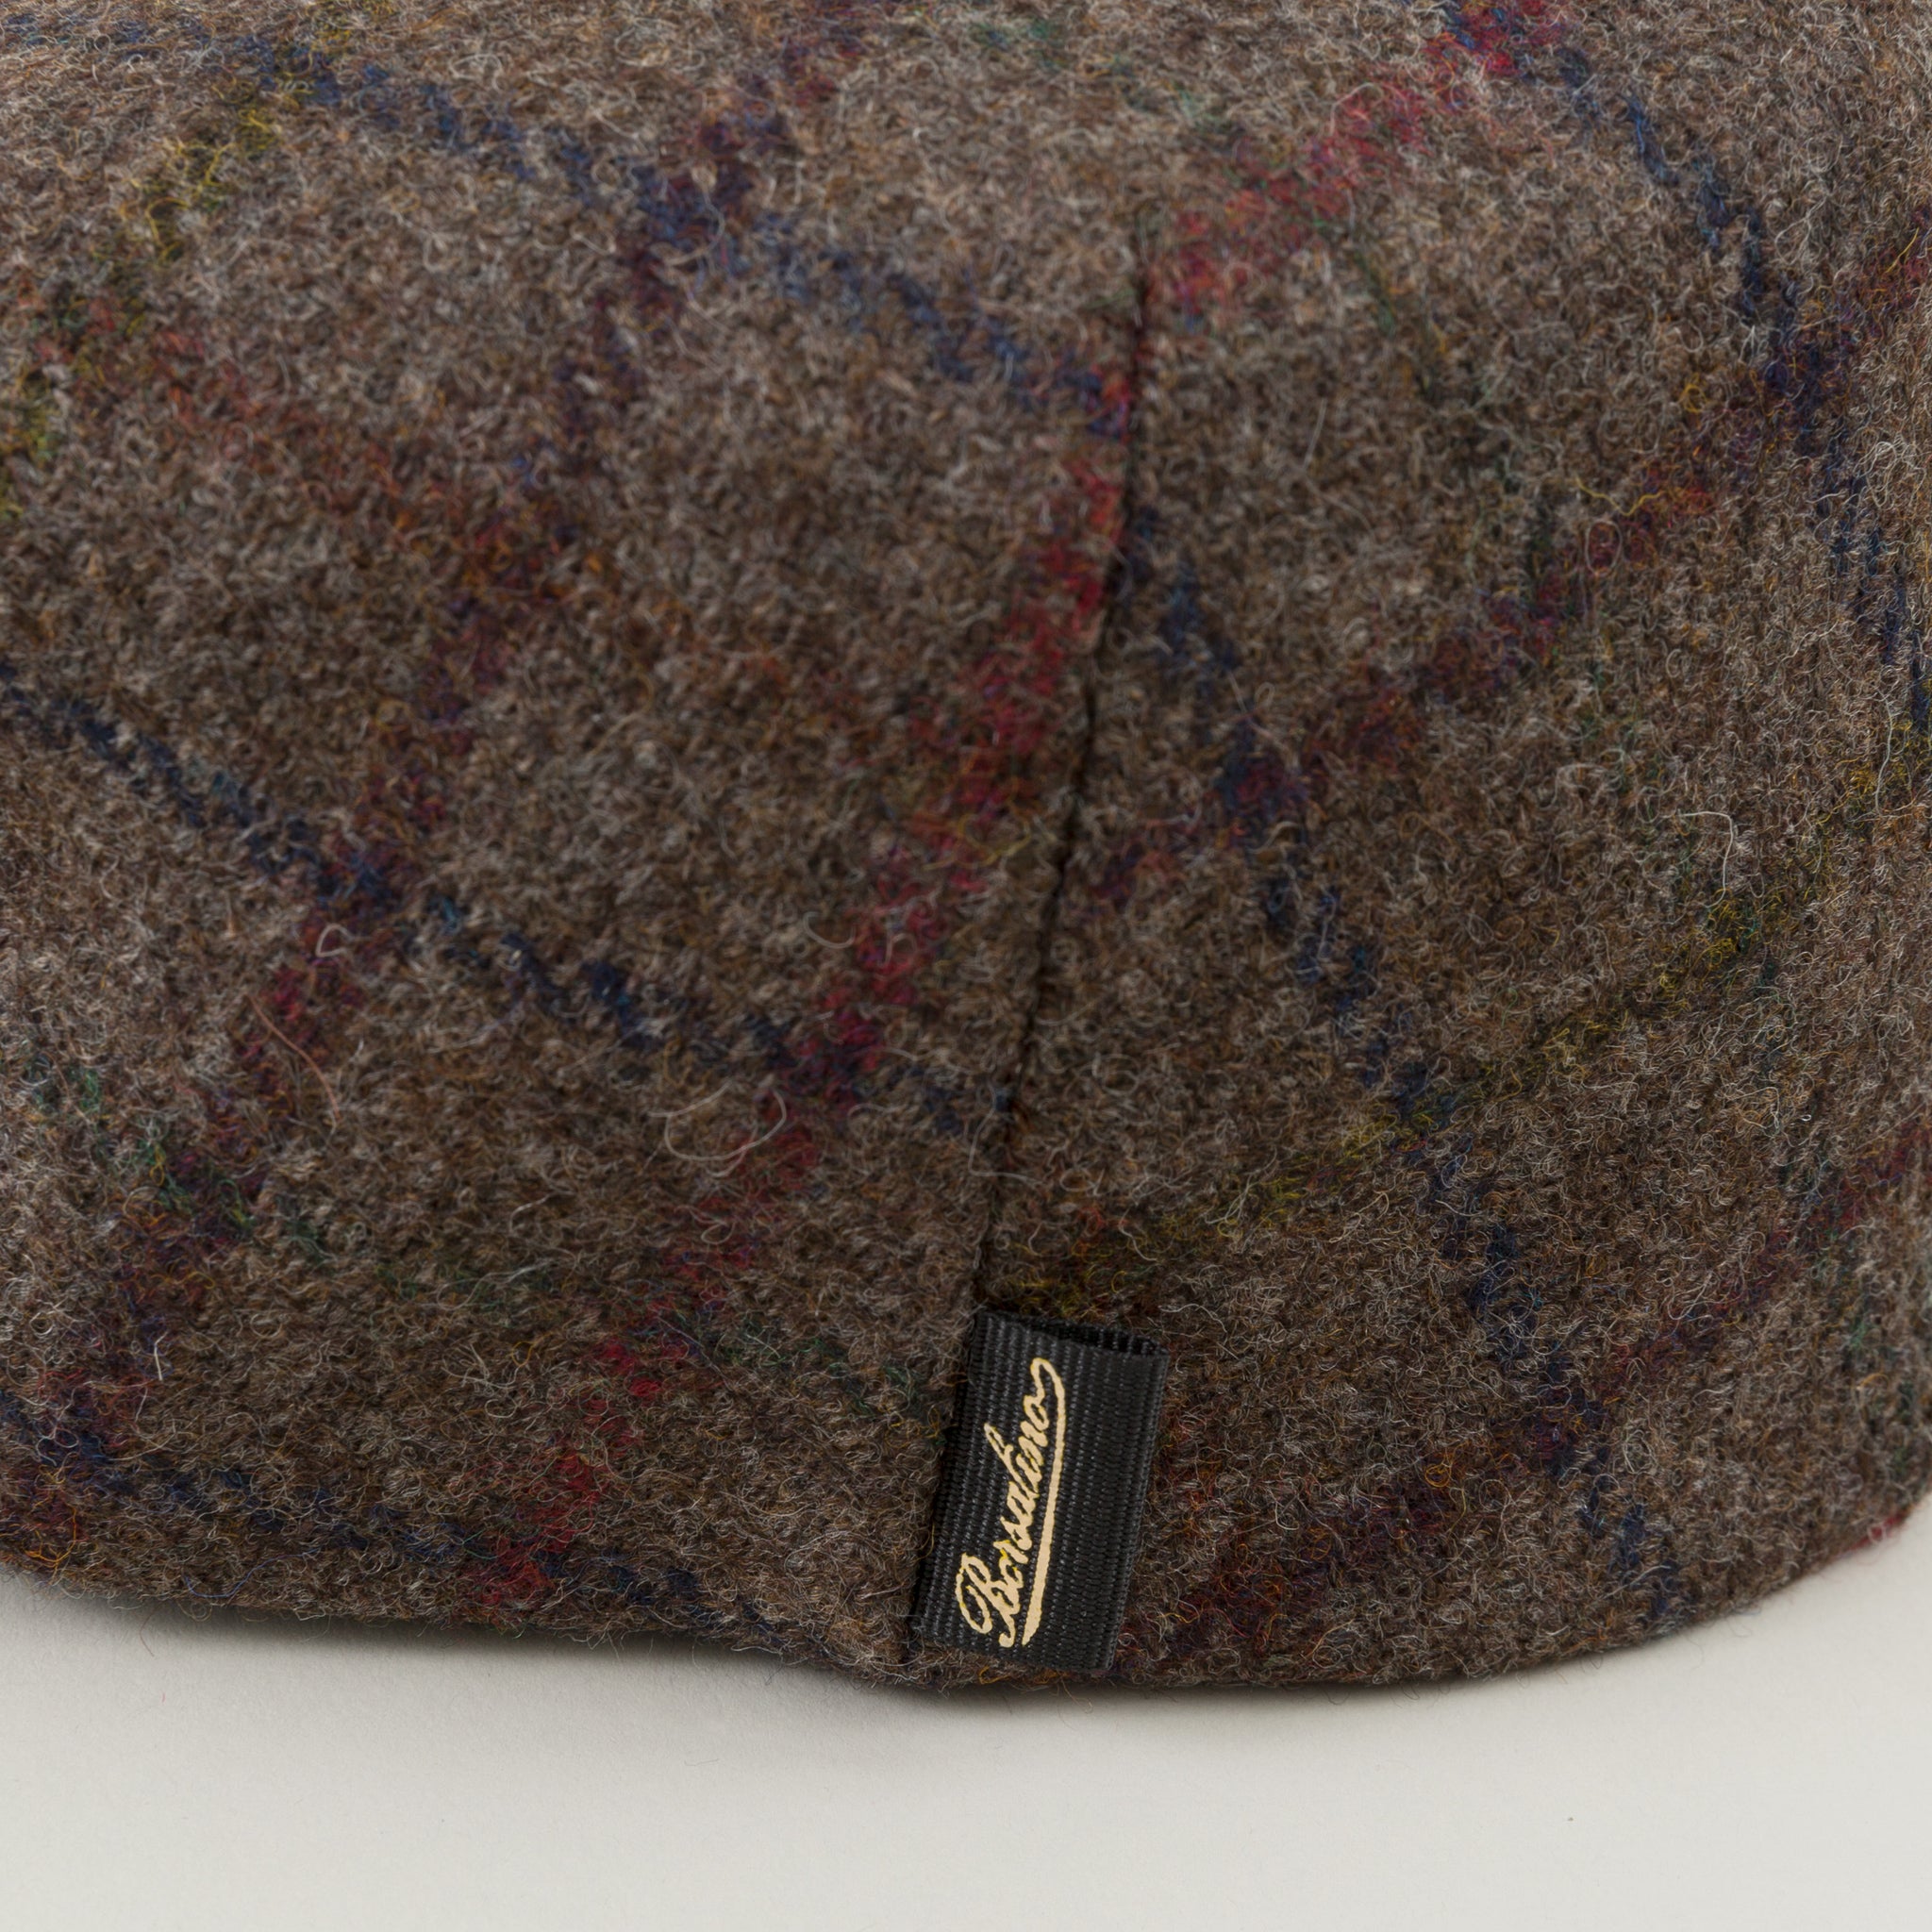 BORSALINO Flat Cap, Brown Overcheck Tweed - The Stronghold